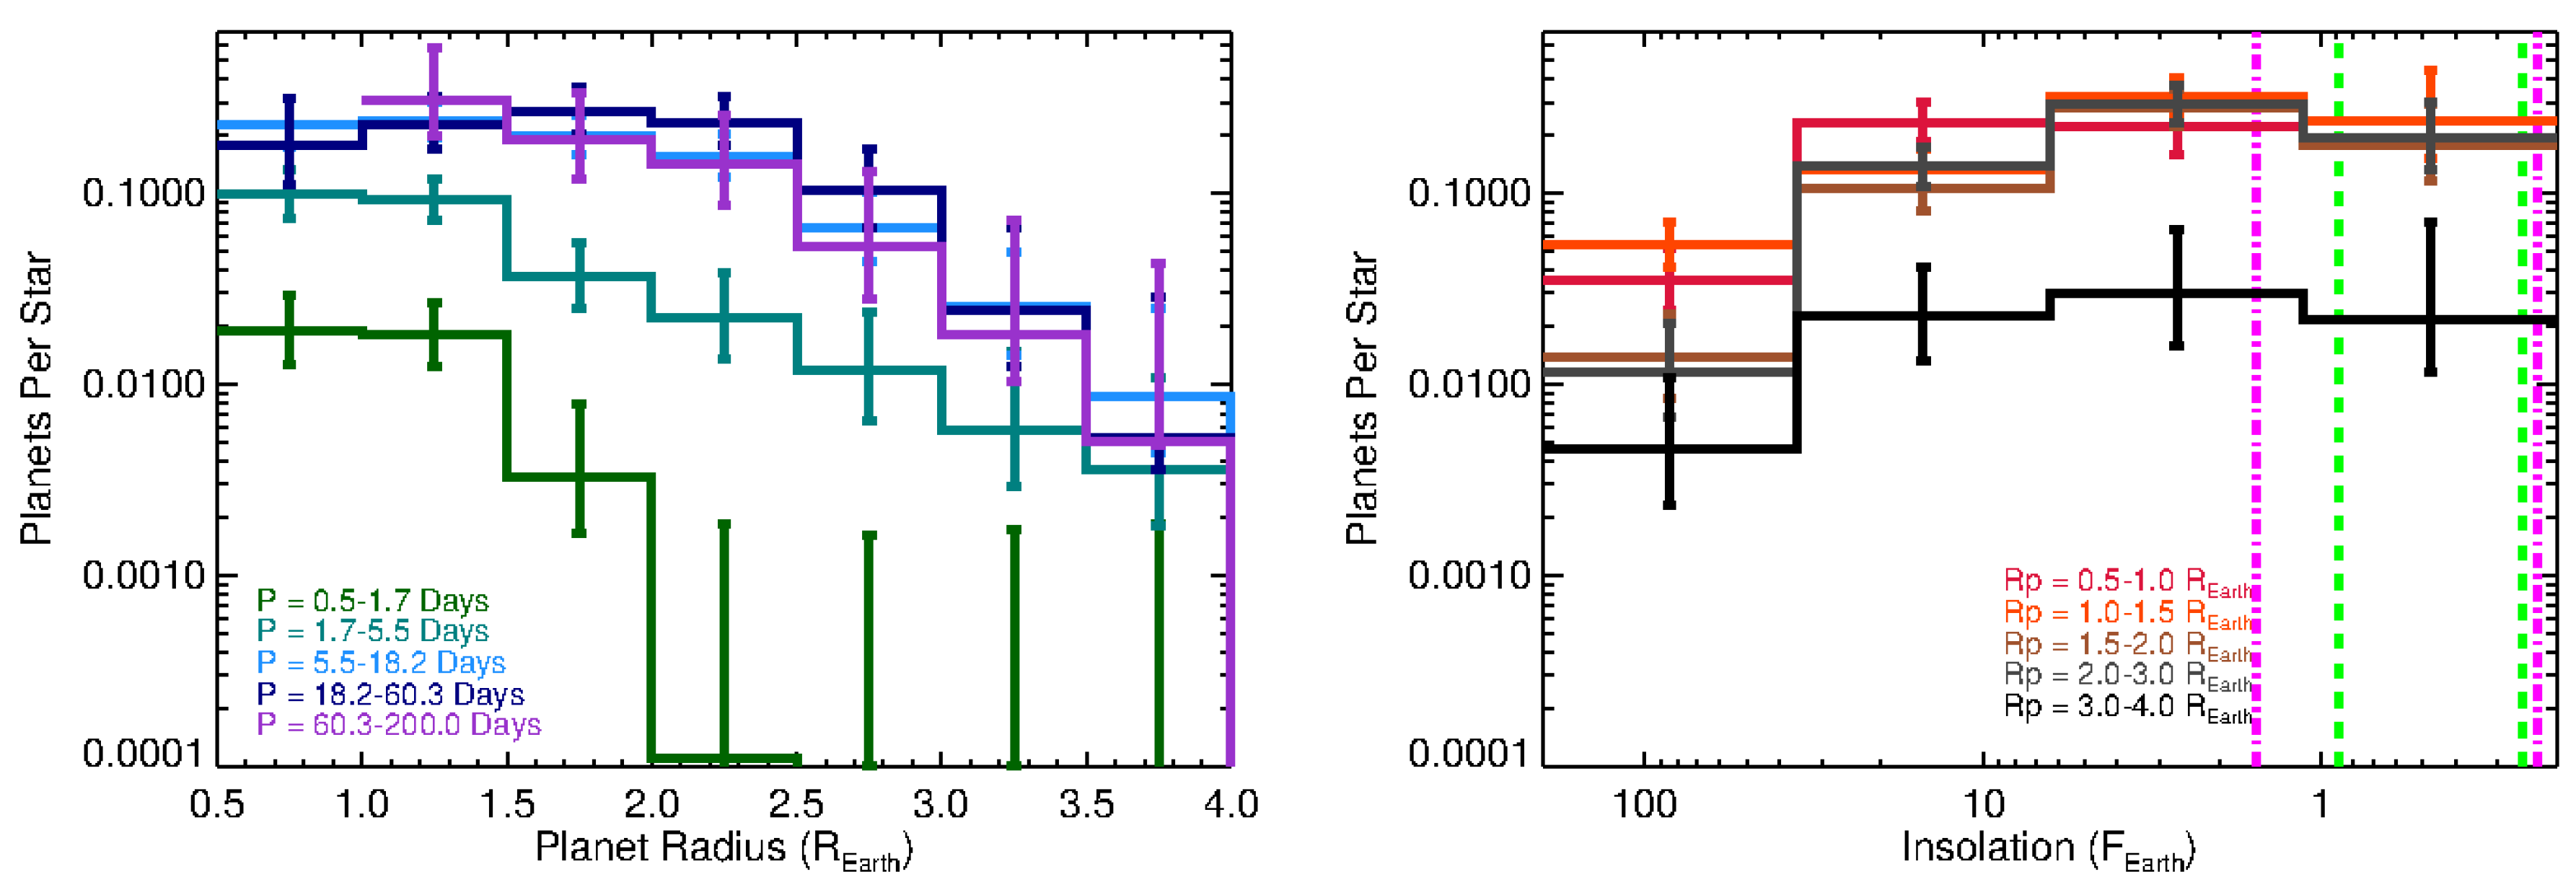 Geosciences Free Full Text Multi Wavelength High Resolution Spectroscopy For Exoplanet Detection Motivation Instrumentation And First Results Html